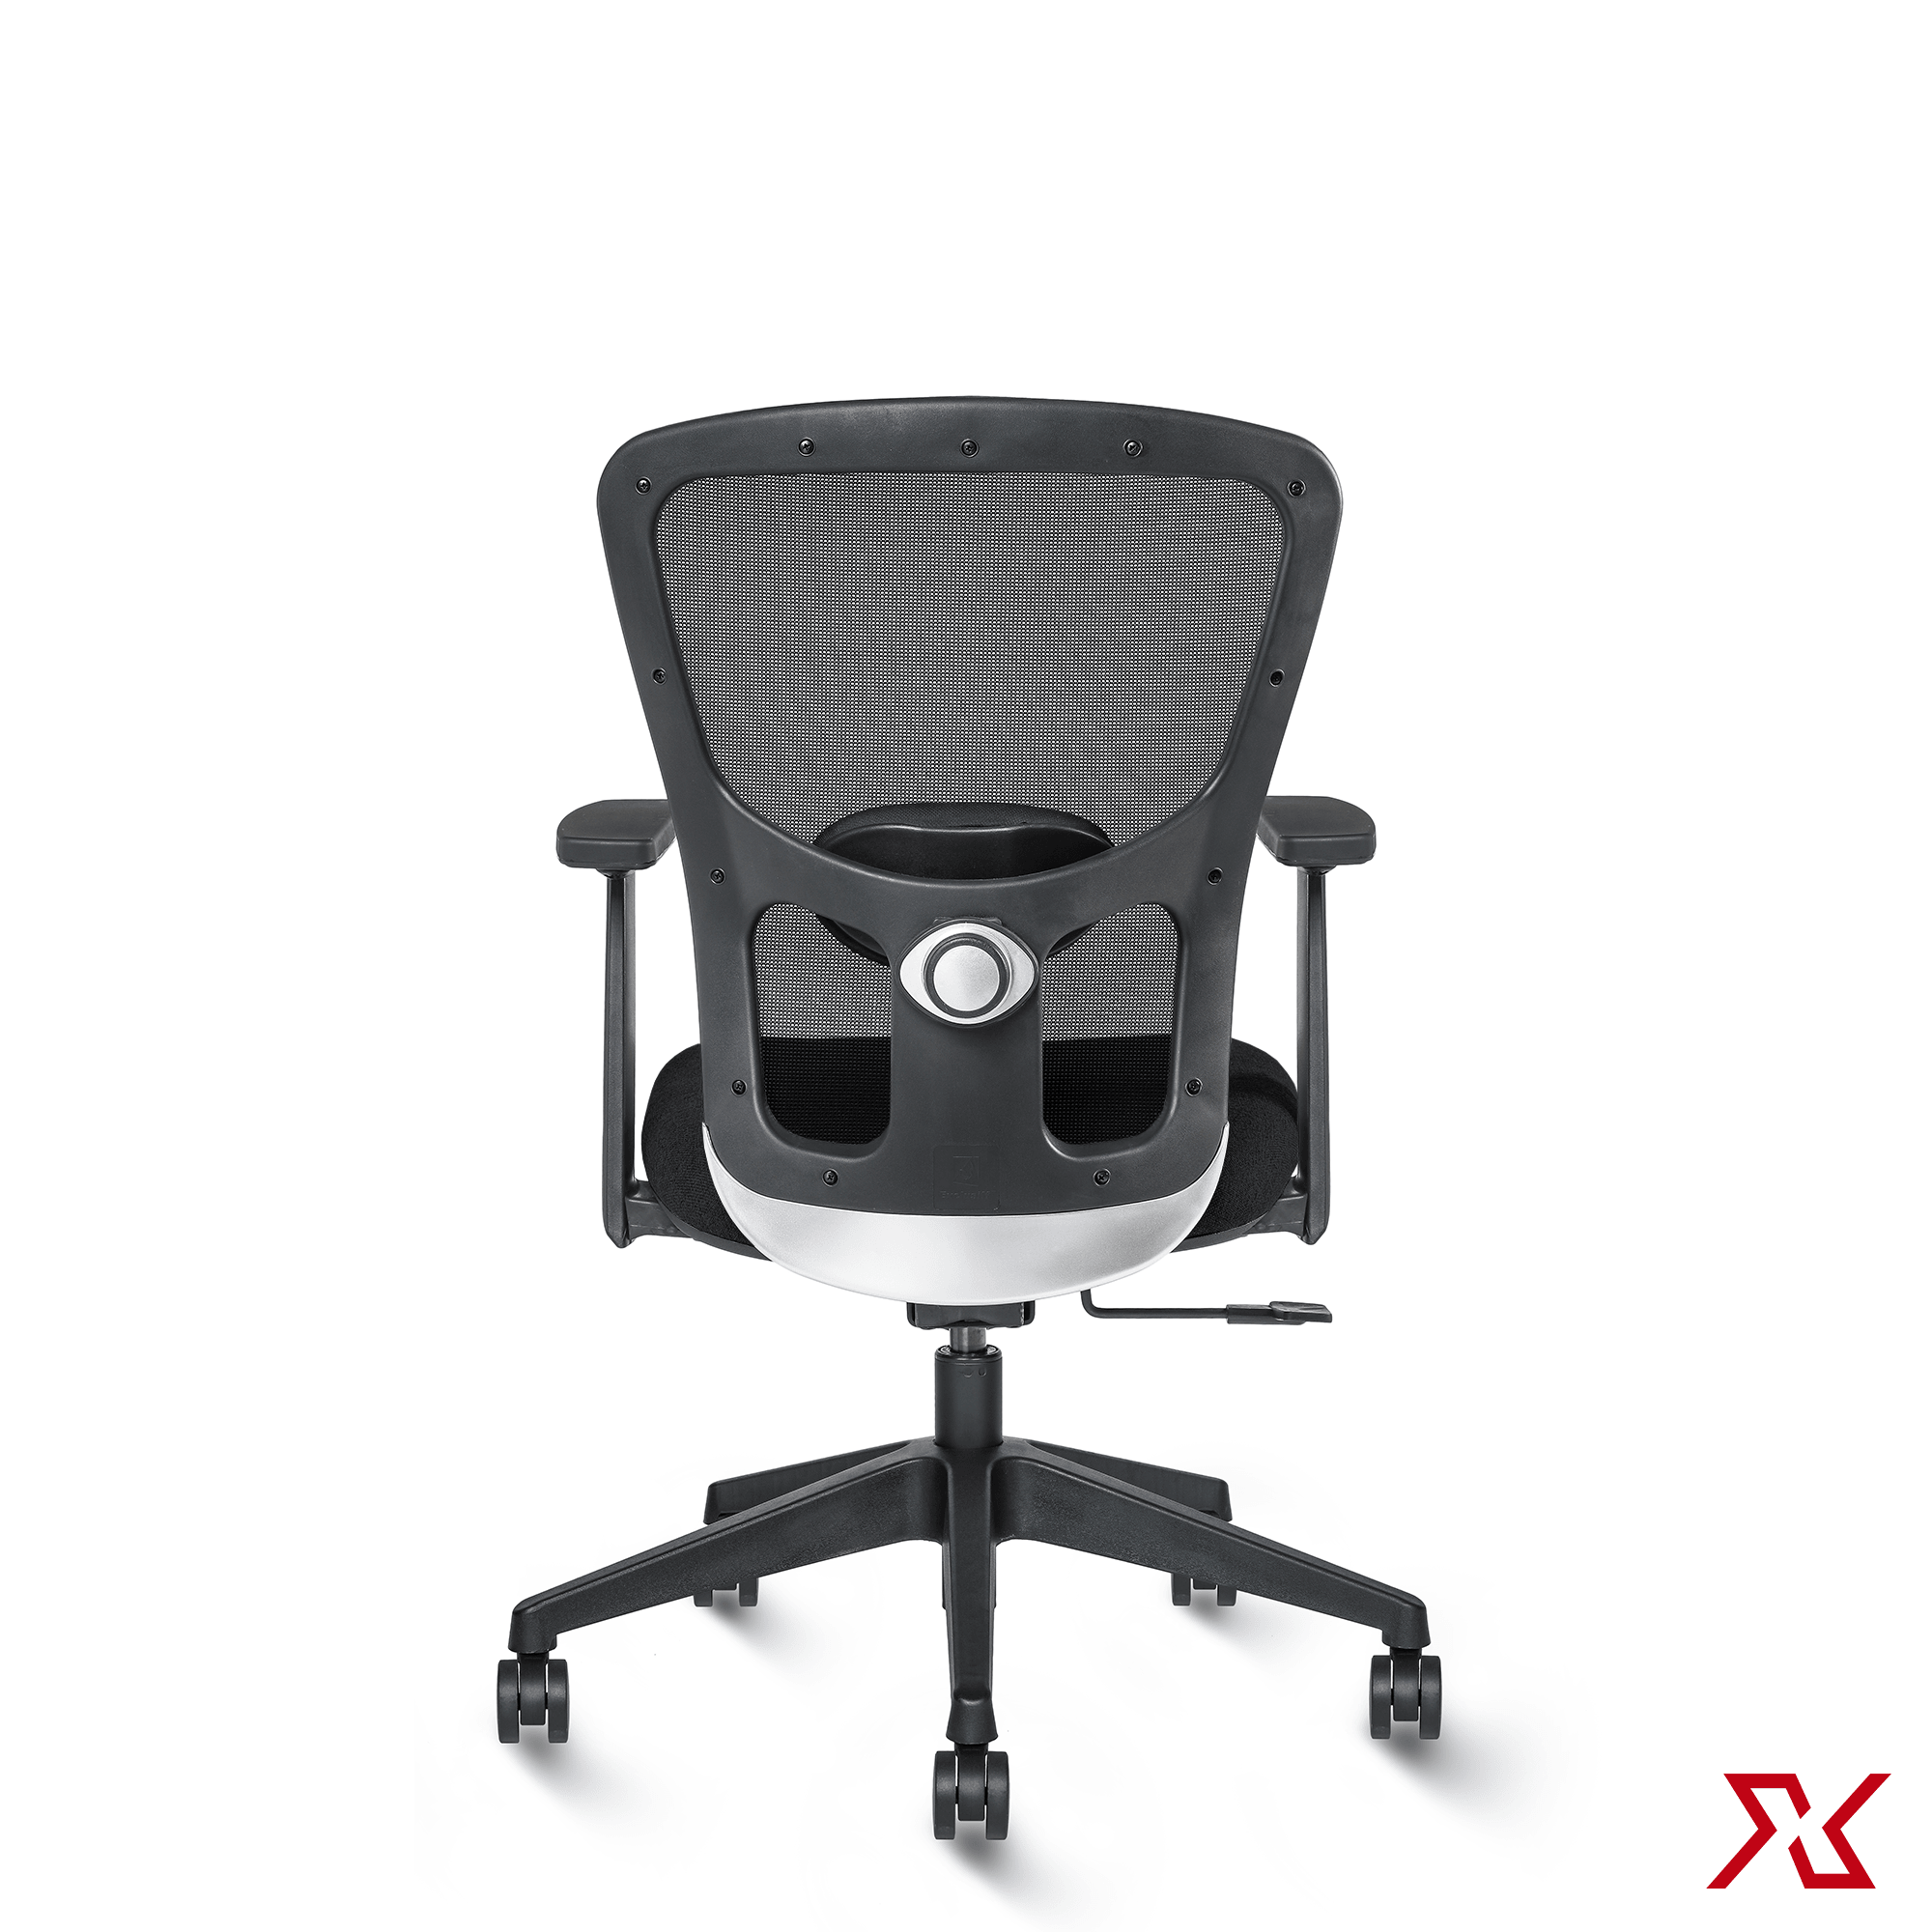 JAZZ Medium Back Fly (Black Chair) - Exclusiff Seating Sytems